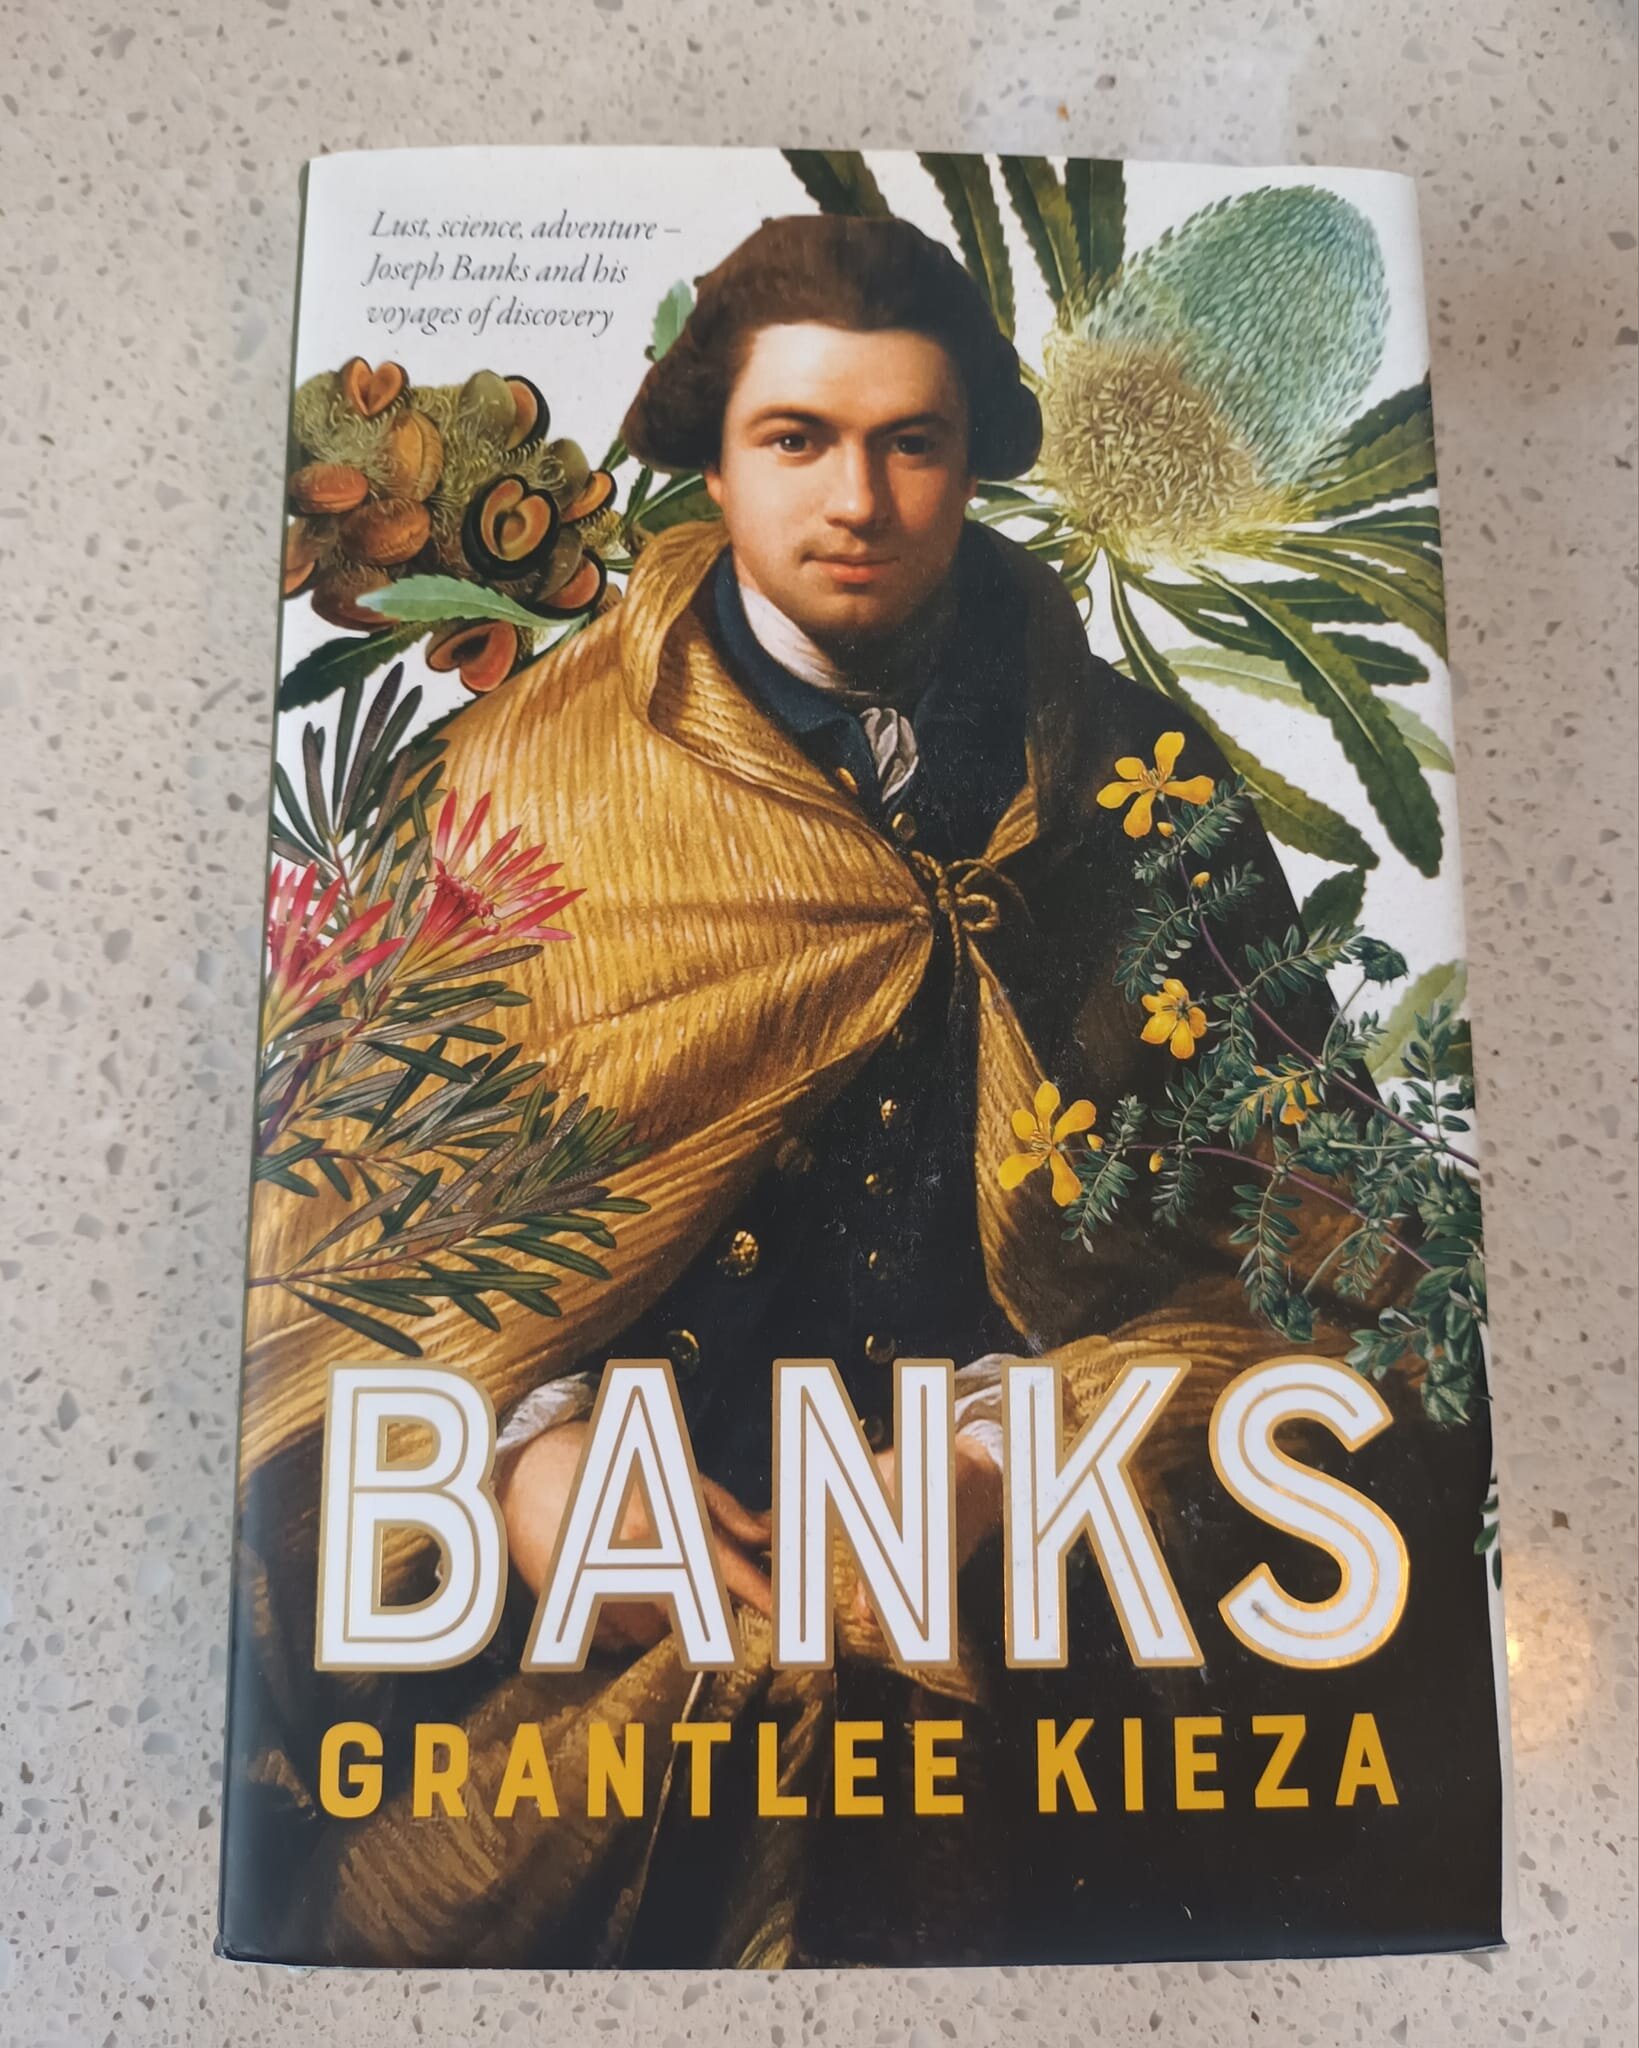 One of our fave recommendations to guests on a dining tour is to purchase and read a book on Sydney. Over the next few days, we will give a summary of each of our most valued reads.

Banks - by Grantlee Kieza
Published by ABC Books

This one is a bod